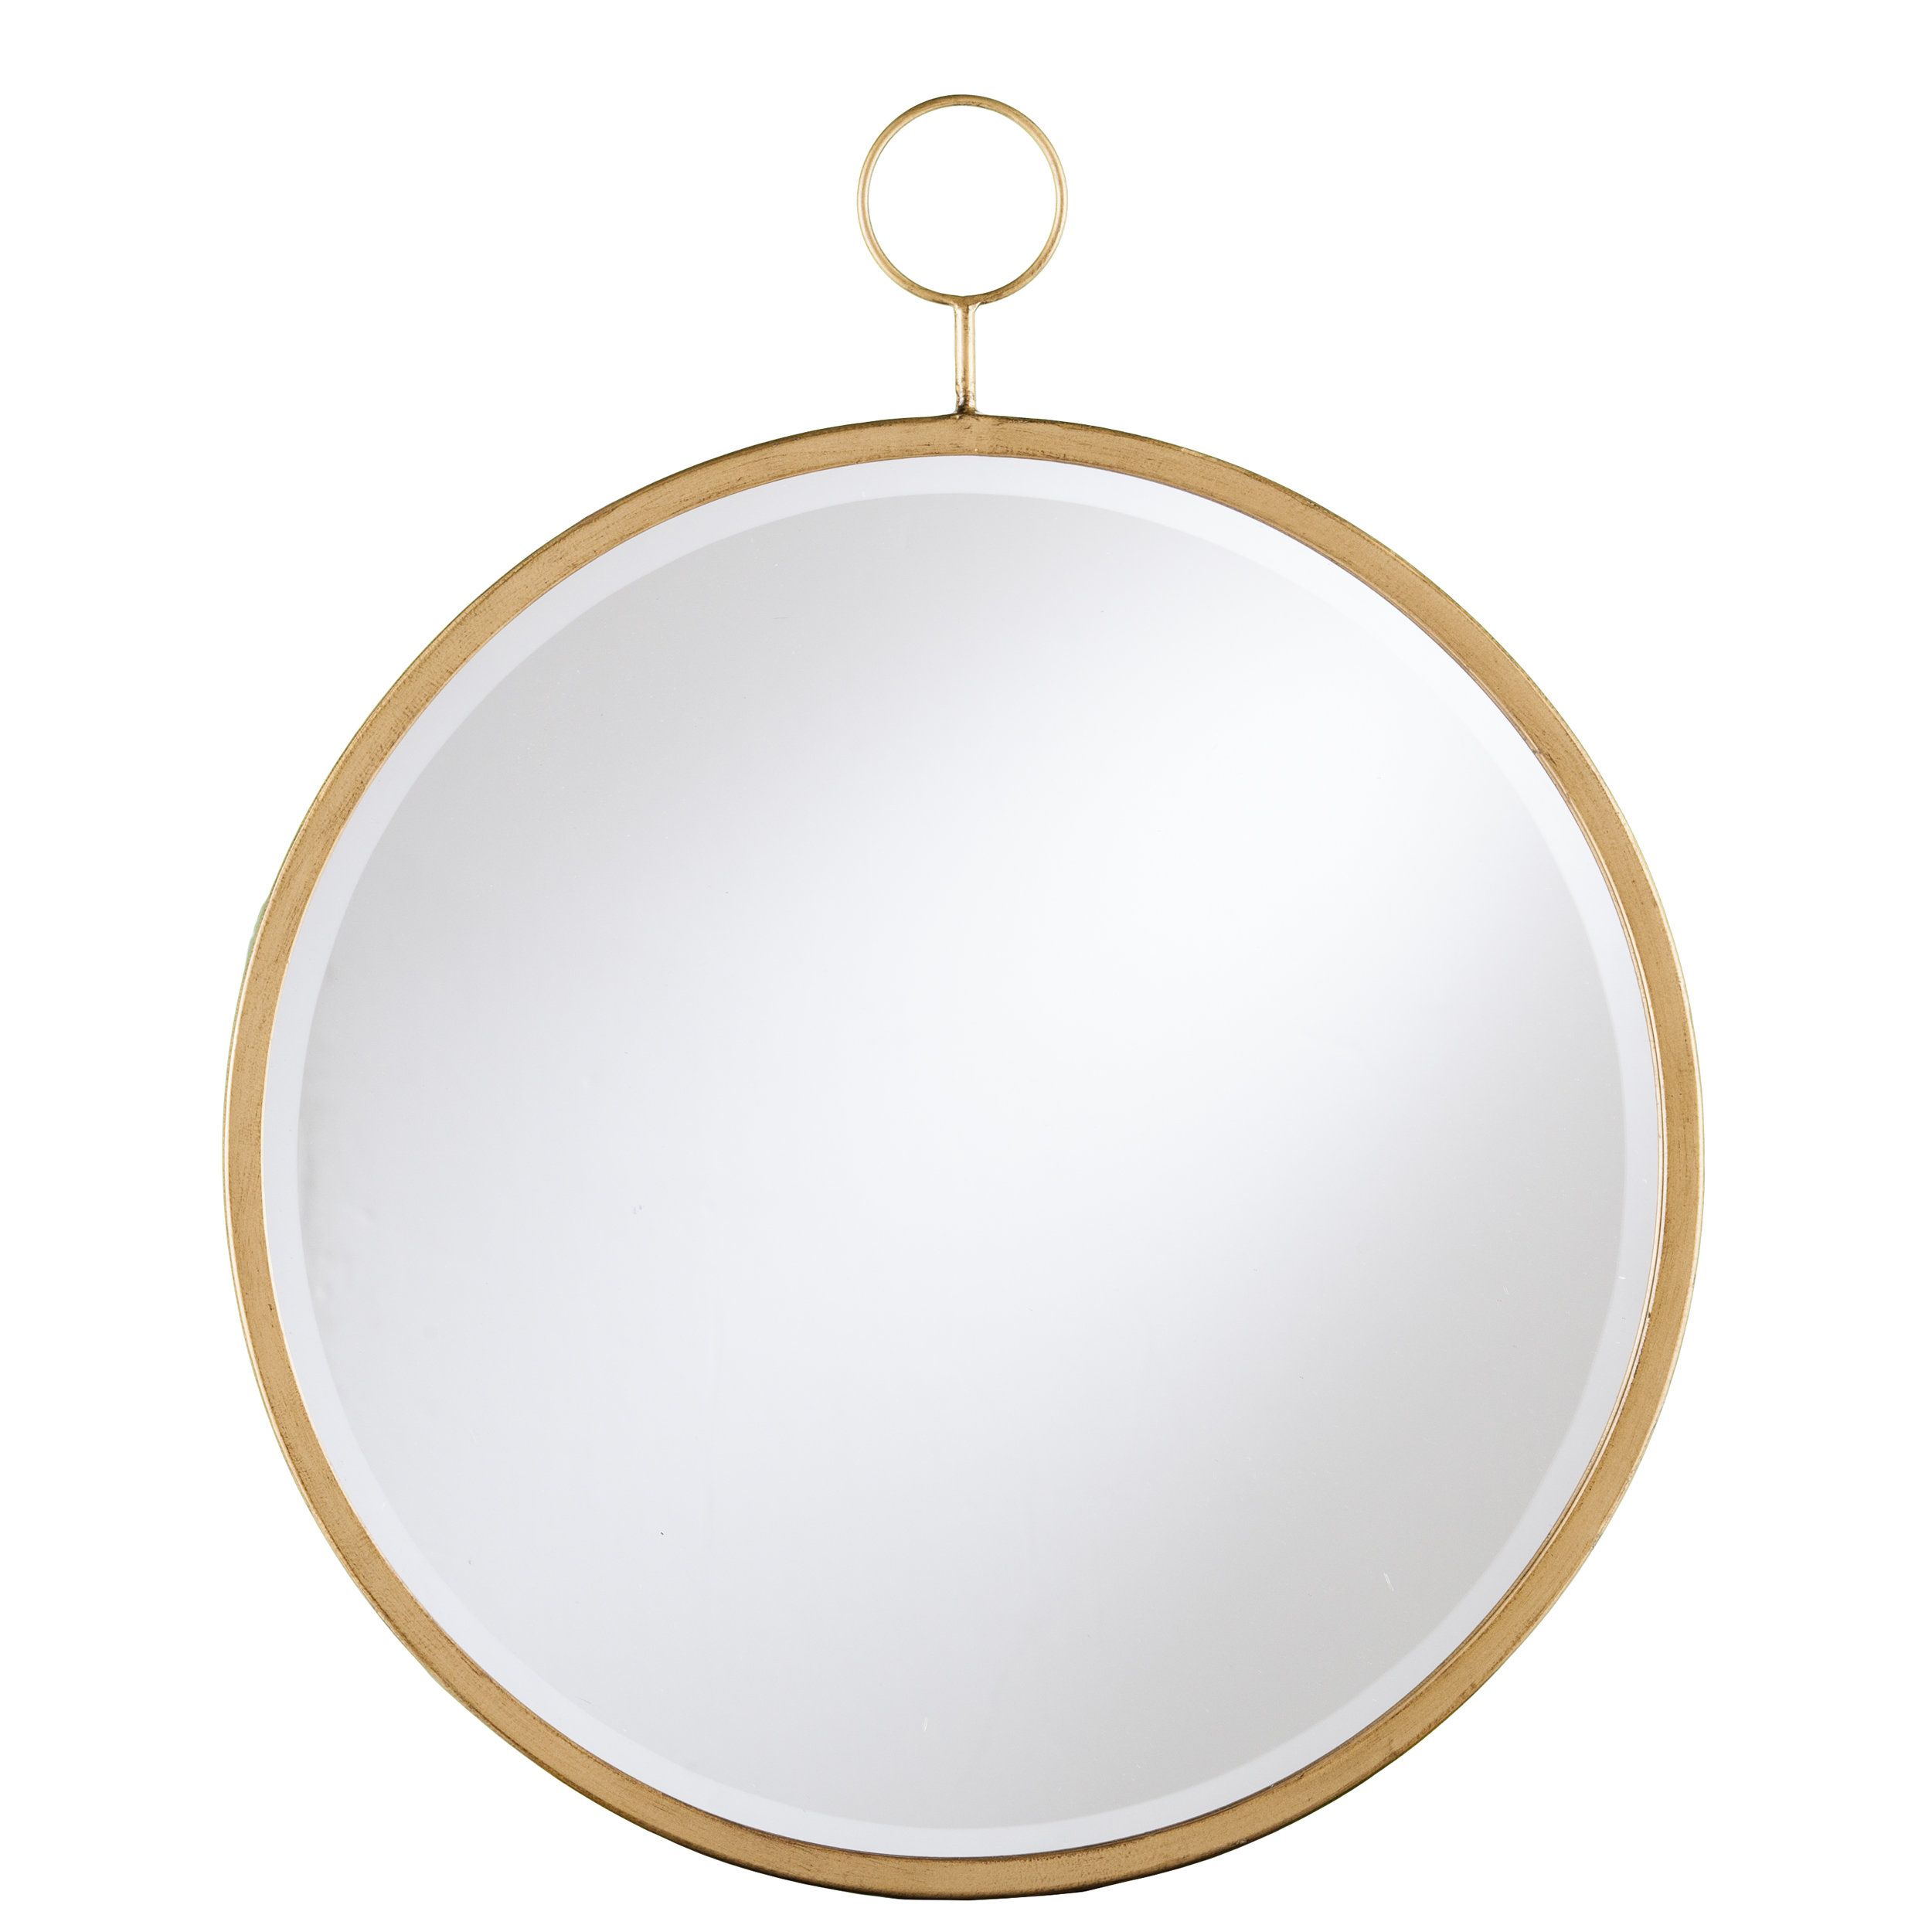 Mistana Accent Mirror & Reviews | Wayfair For Tanner Accent Mirrors (View 16 of 30)